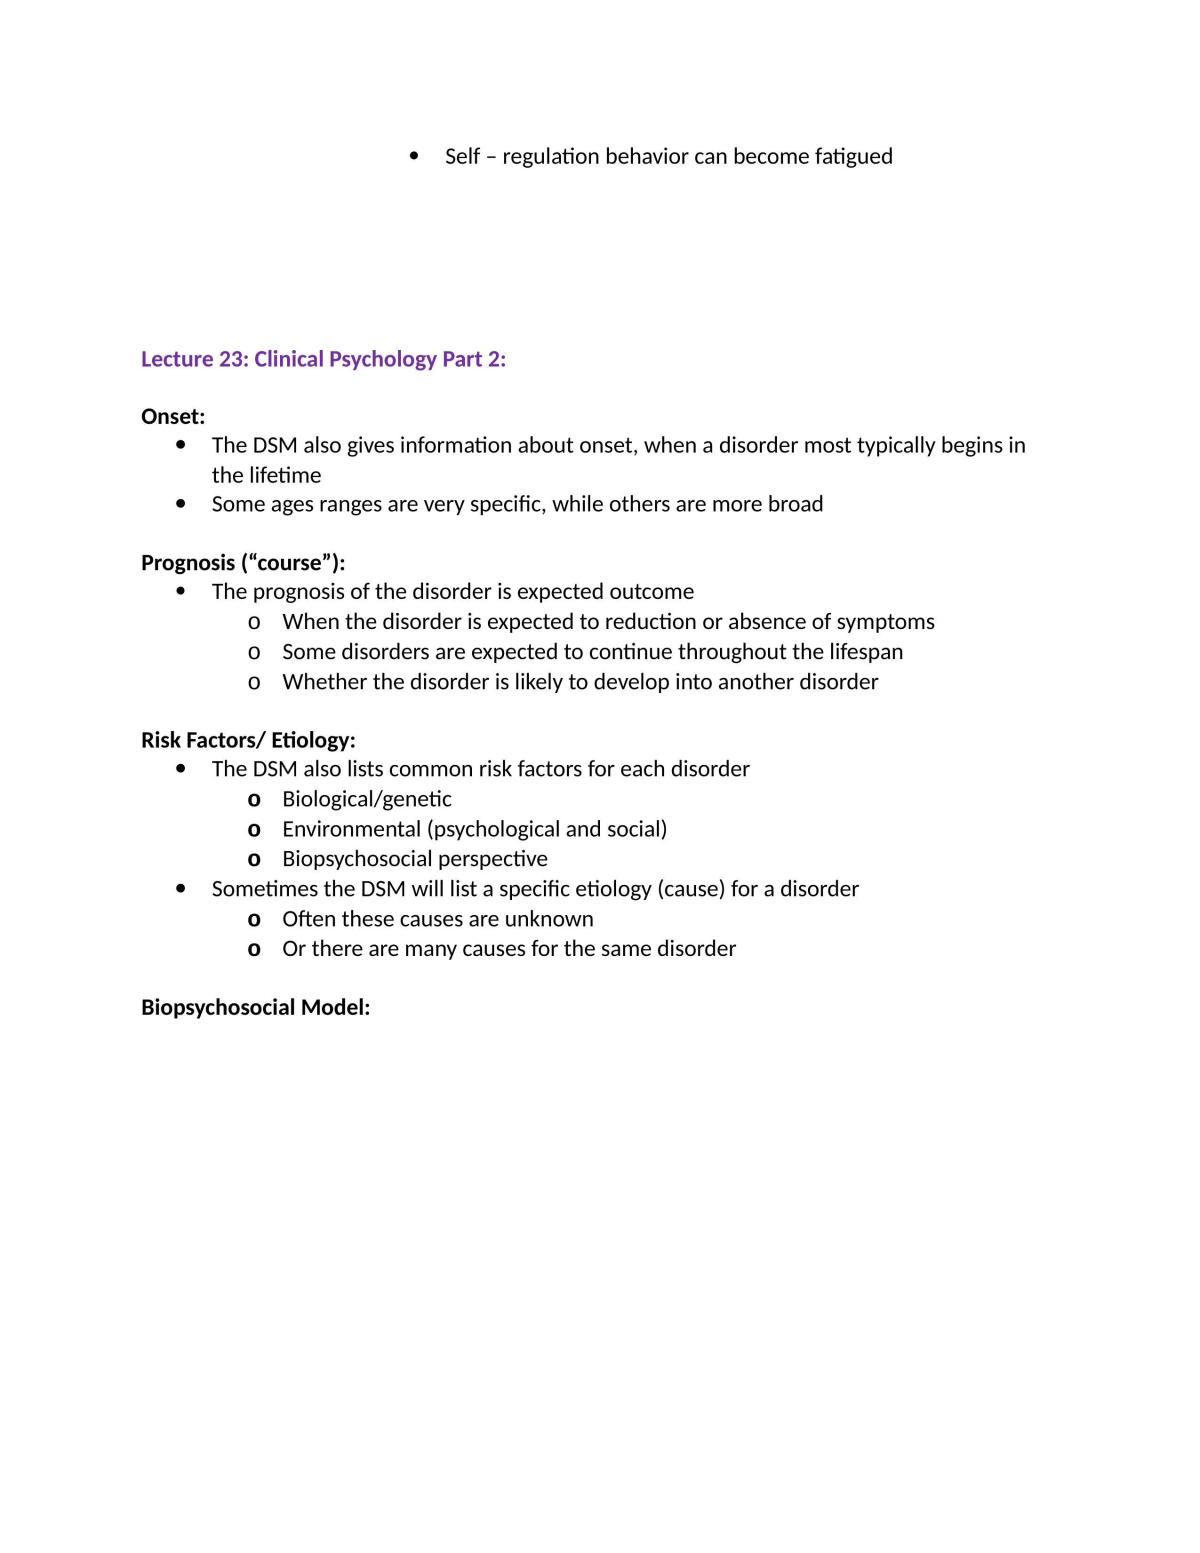 Complete Study Notes - PSYA02 - Page 45